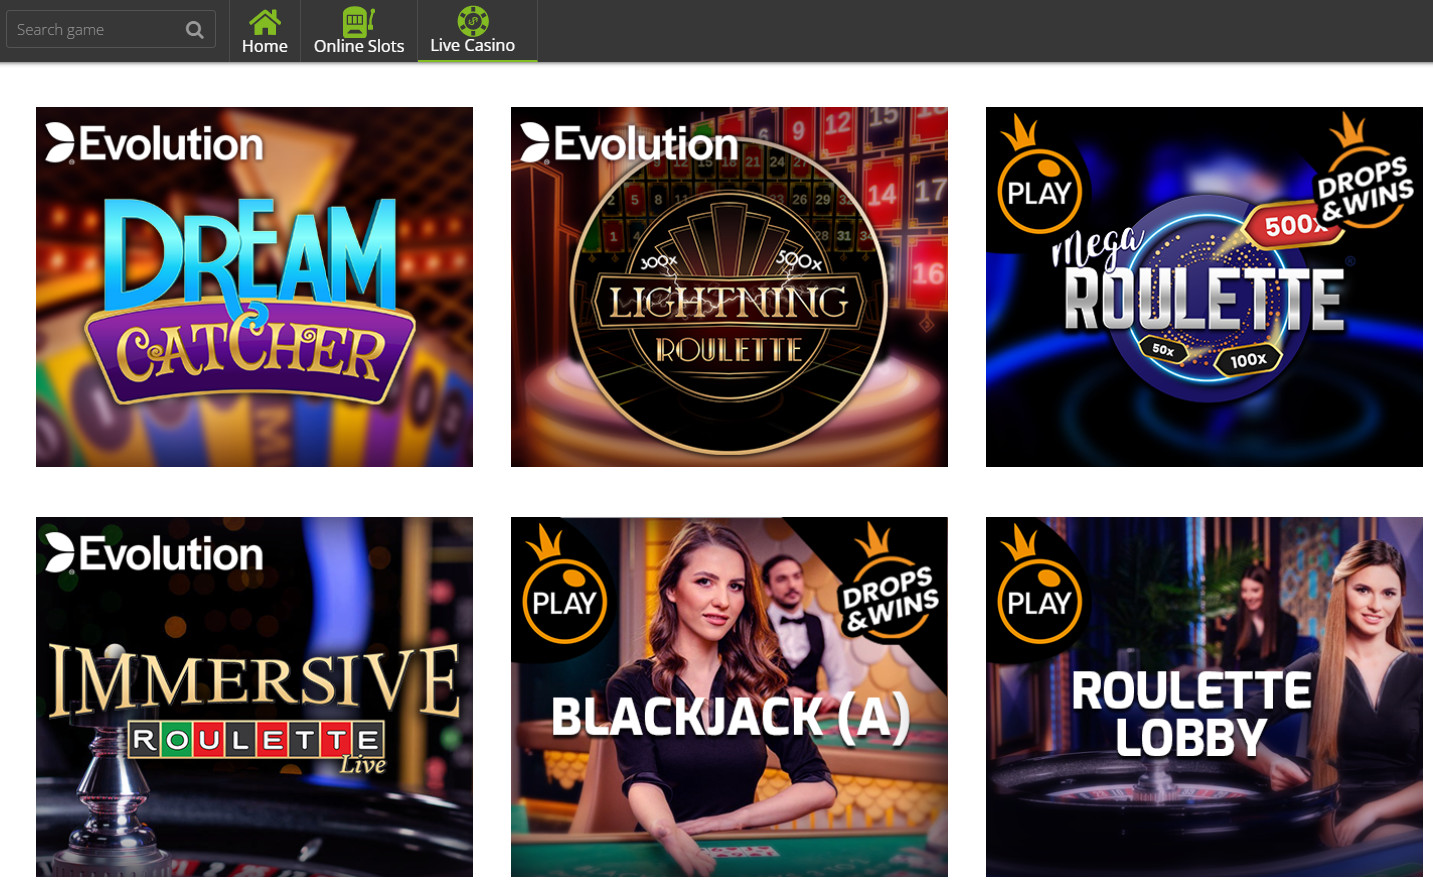 Live Games Section at Lapalingo Casino